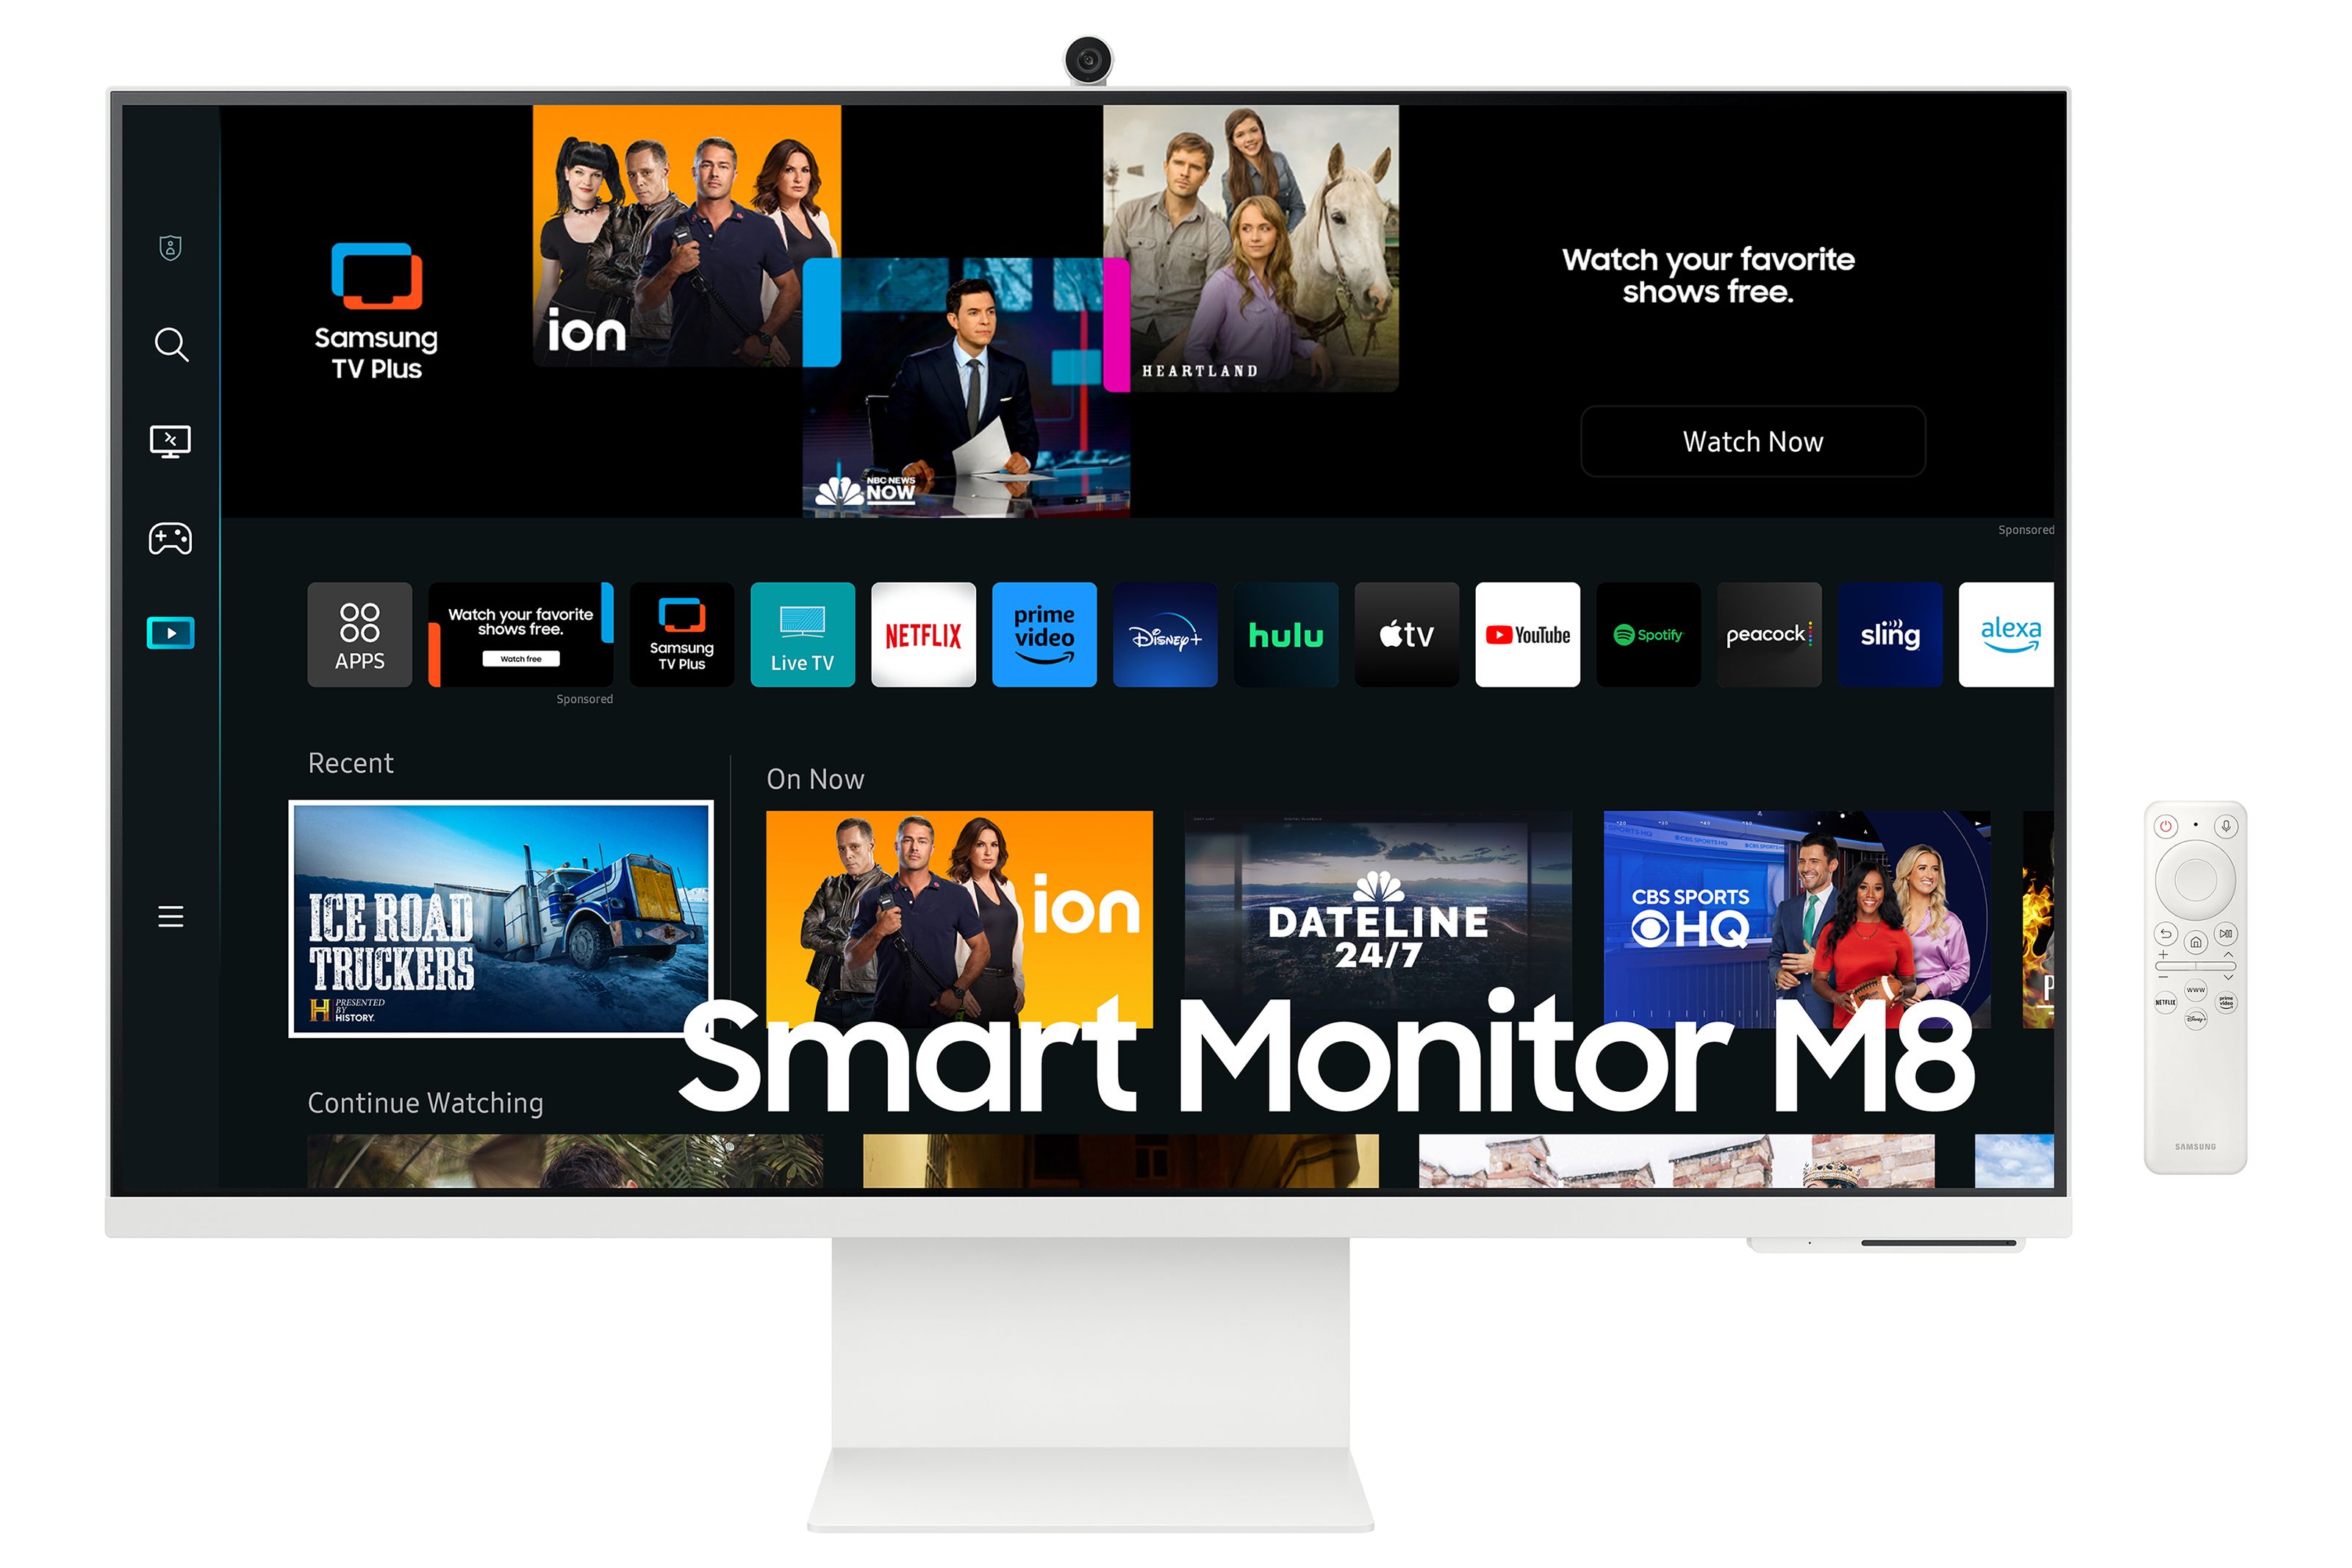 27 inch Samsung M8 smart monitor with remote control on a white background.